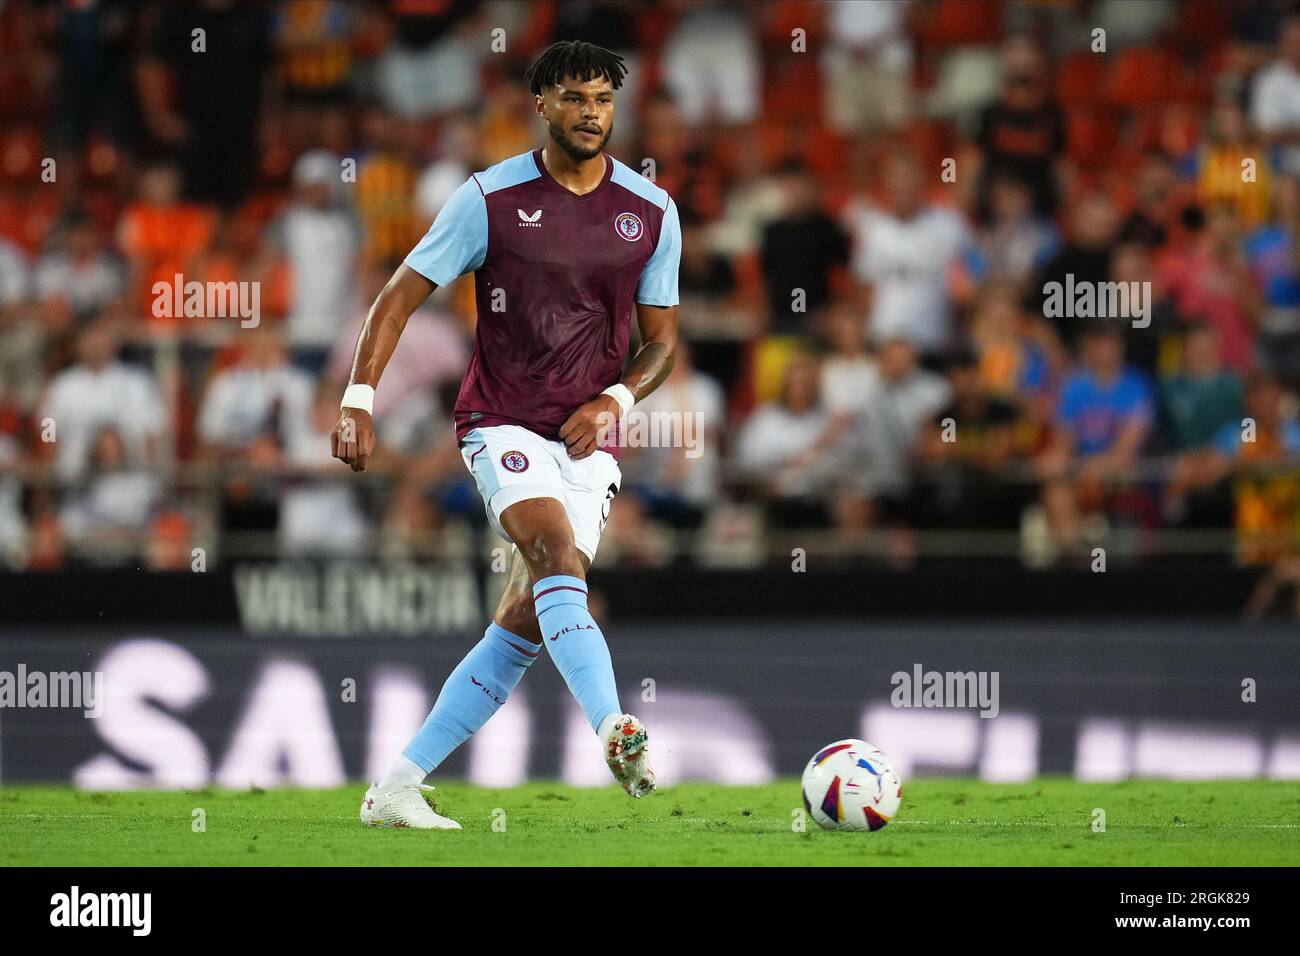 Barcelona, Spain. 08th Aug, 2023. Tyrone Mings of Aston Villa during the Pre-season friendly, Joan Gamper Trophy match between FC Barcelona and Tottenham Hotspur played at Luis Companys Stadium on August 8, 2023 in Barcelona, Spain. (Photo by Sergio Ruiz/PRESSINPHOTO) Credit: PRESSINPHOTO SPORTS AGENCY/Alamy Live News Stock Photo